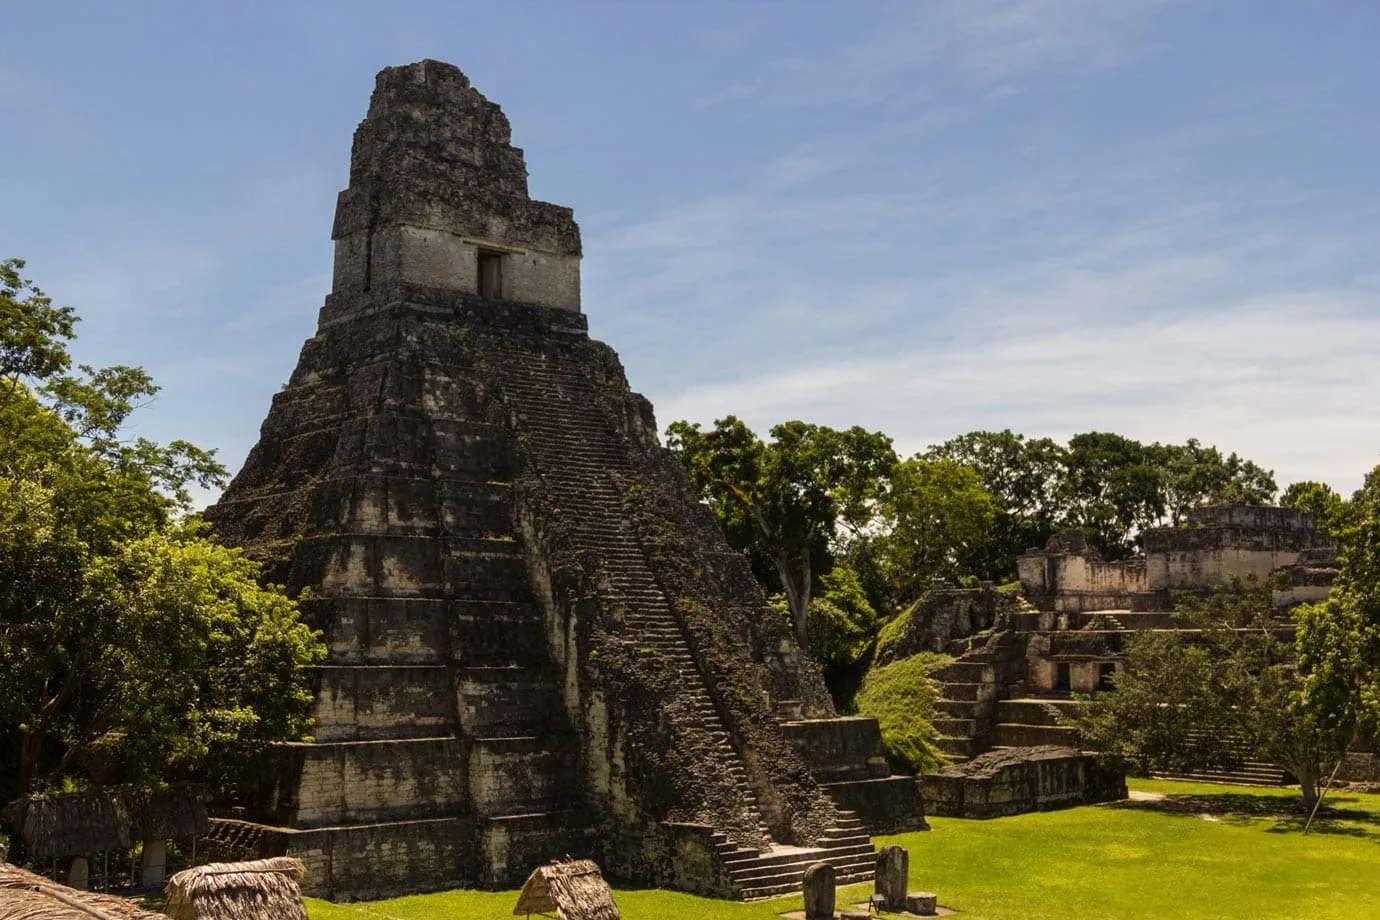 From the smallest cluster of stones to the tallest pyramid the whole site is incredibly impressive, and taking in Tikal is a must on any trip to Guatemala and Central America